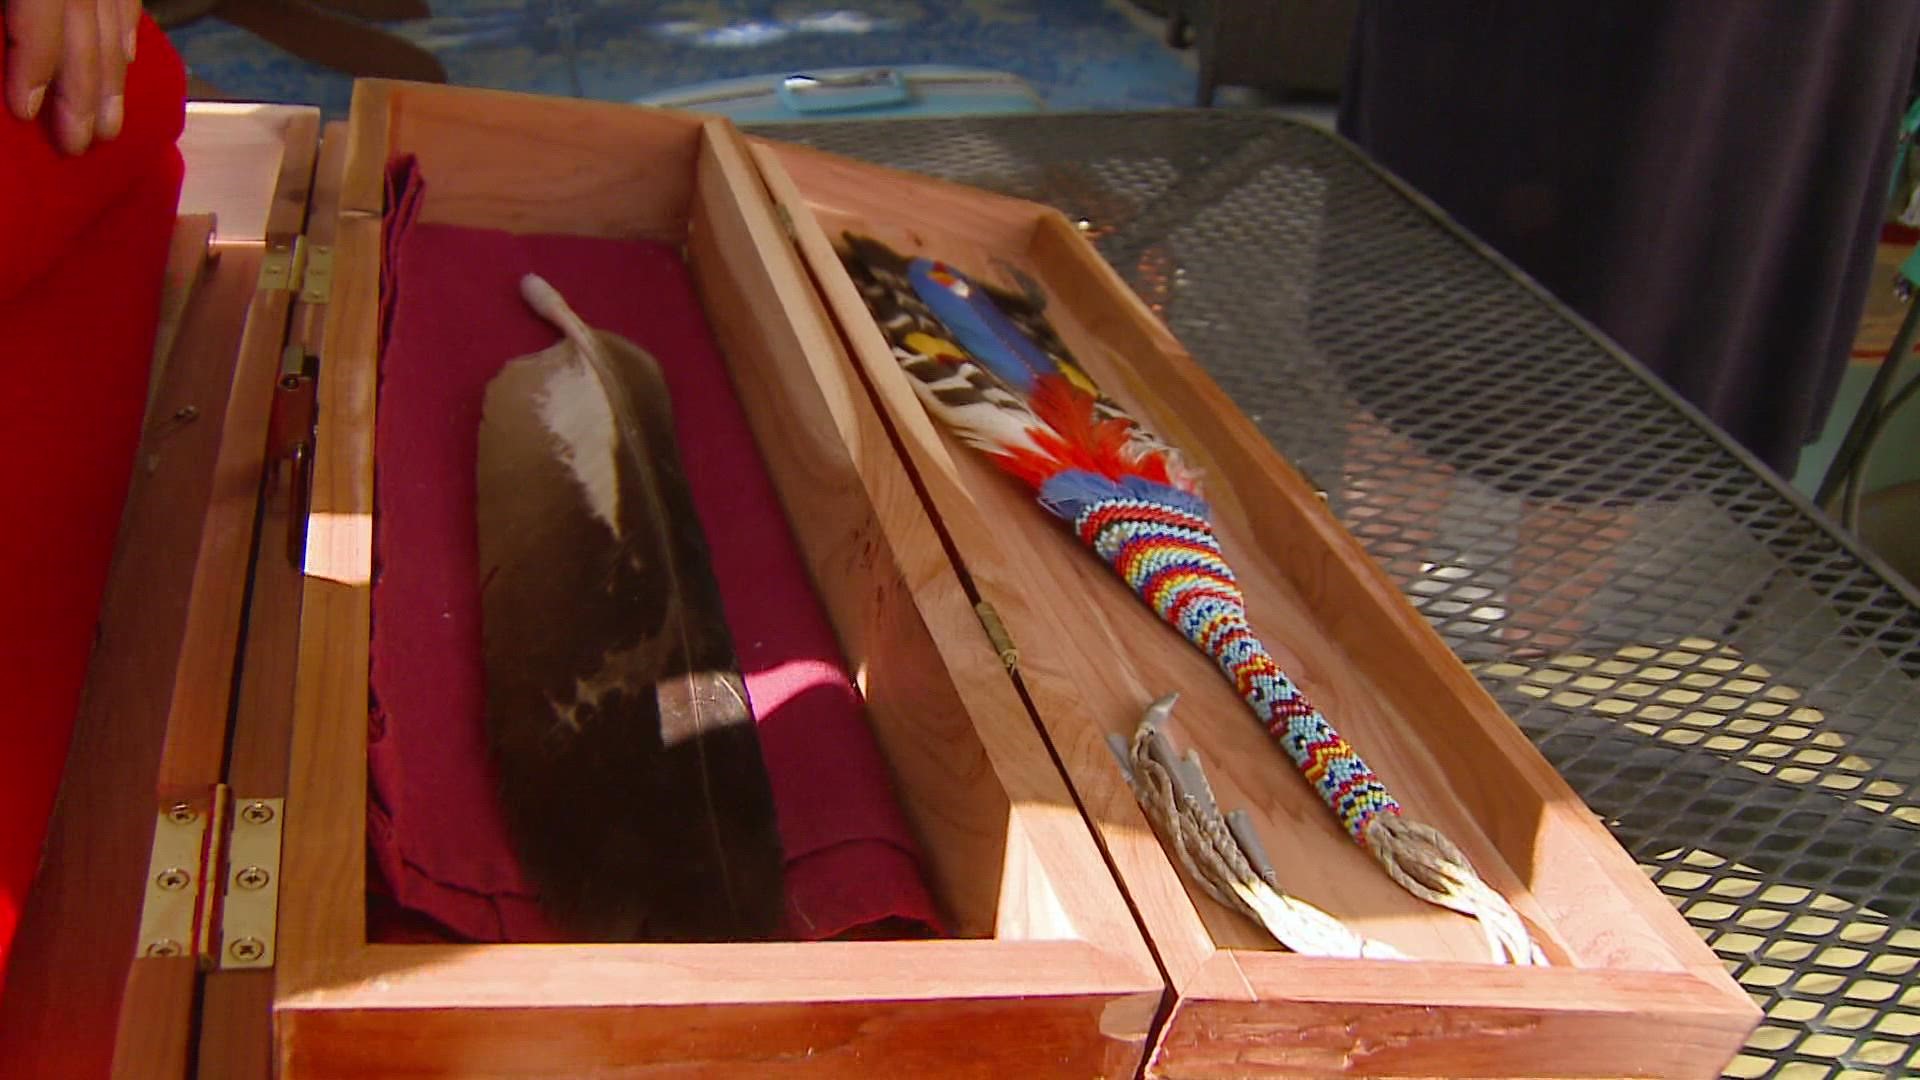 The Jacobs family said their Osage Nation regalia was largely untouched. The heirlooms have been passed down and worn by family members from three generations.